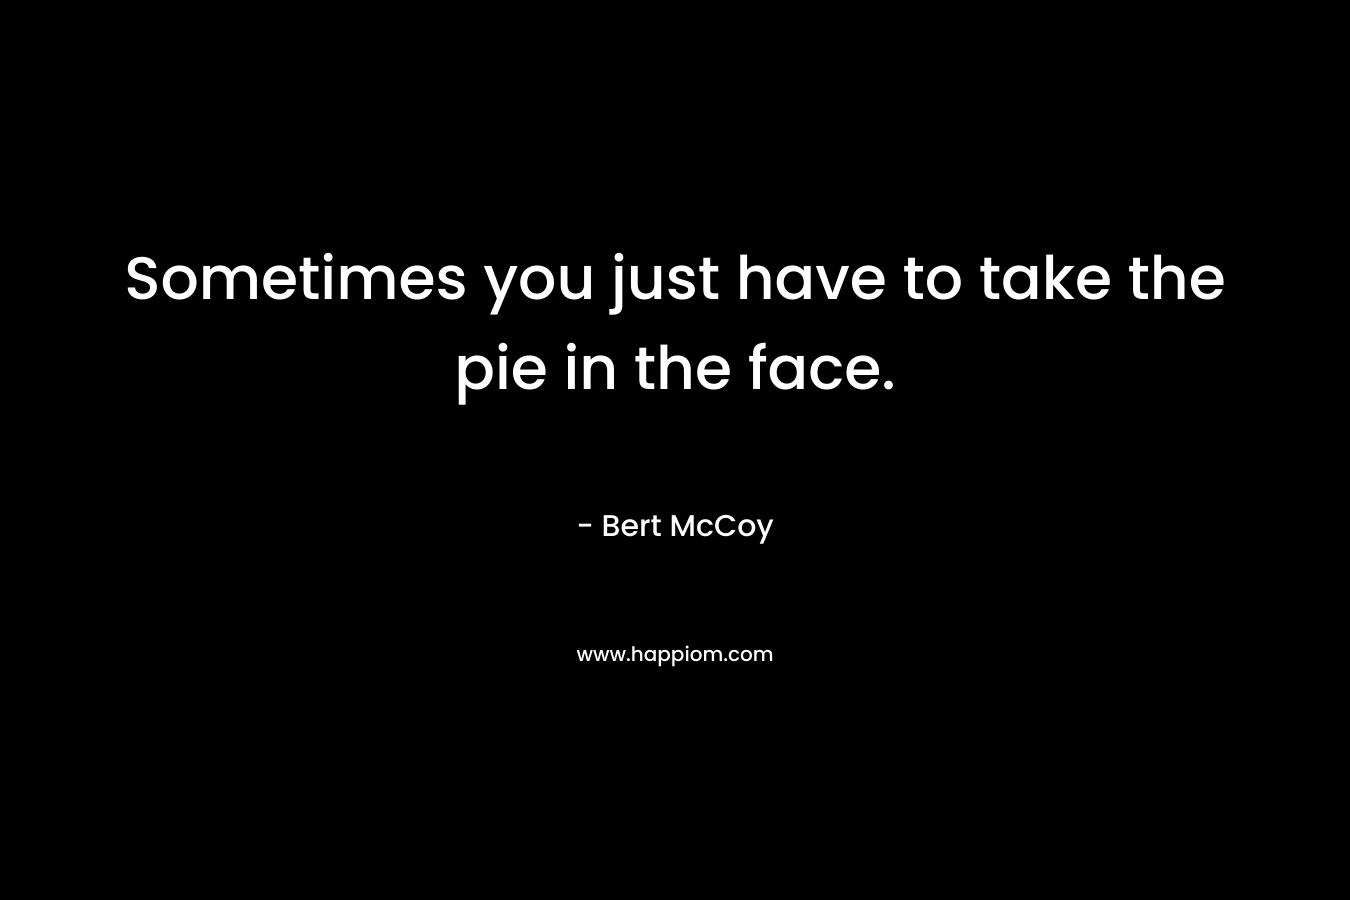 Sometimes you just have to take the pie in the face.